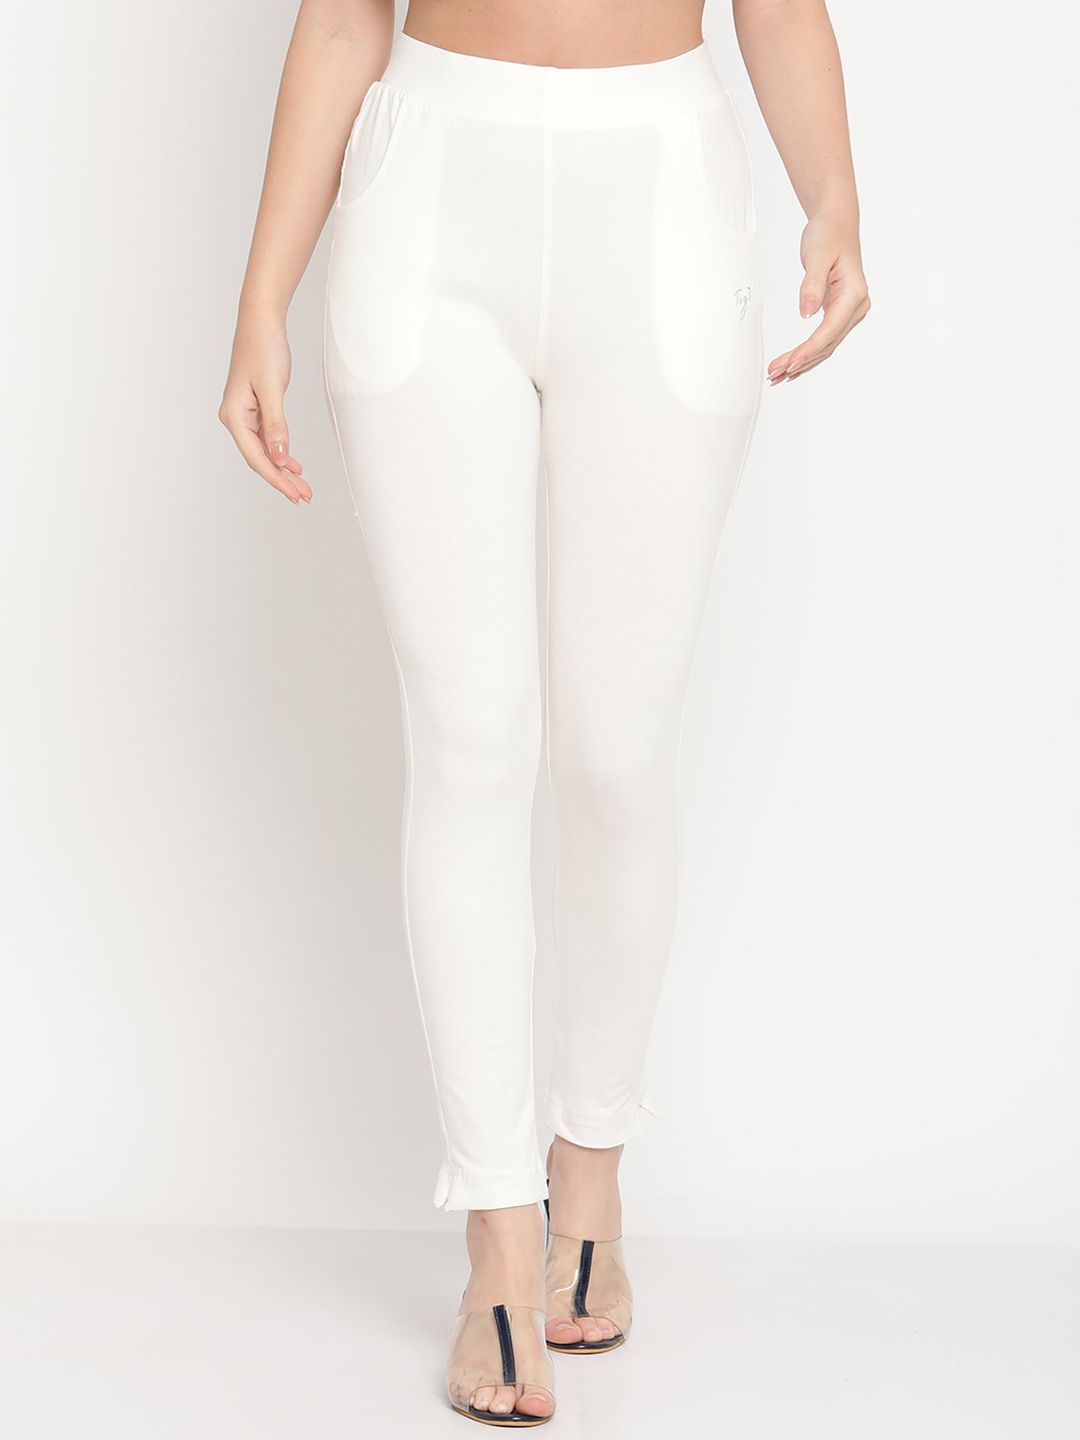 TAG 7 Women Off-White Solid Ankle-Length Leggings Price in India